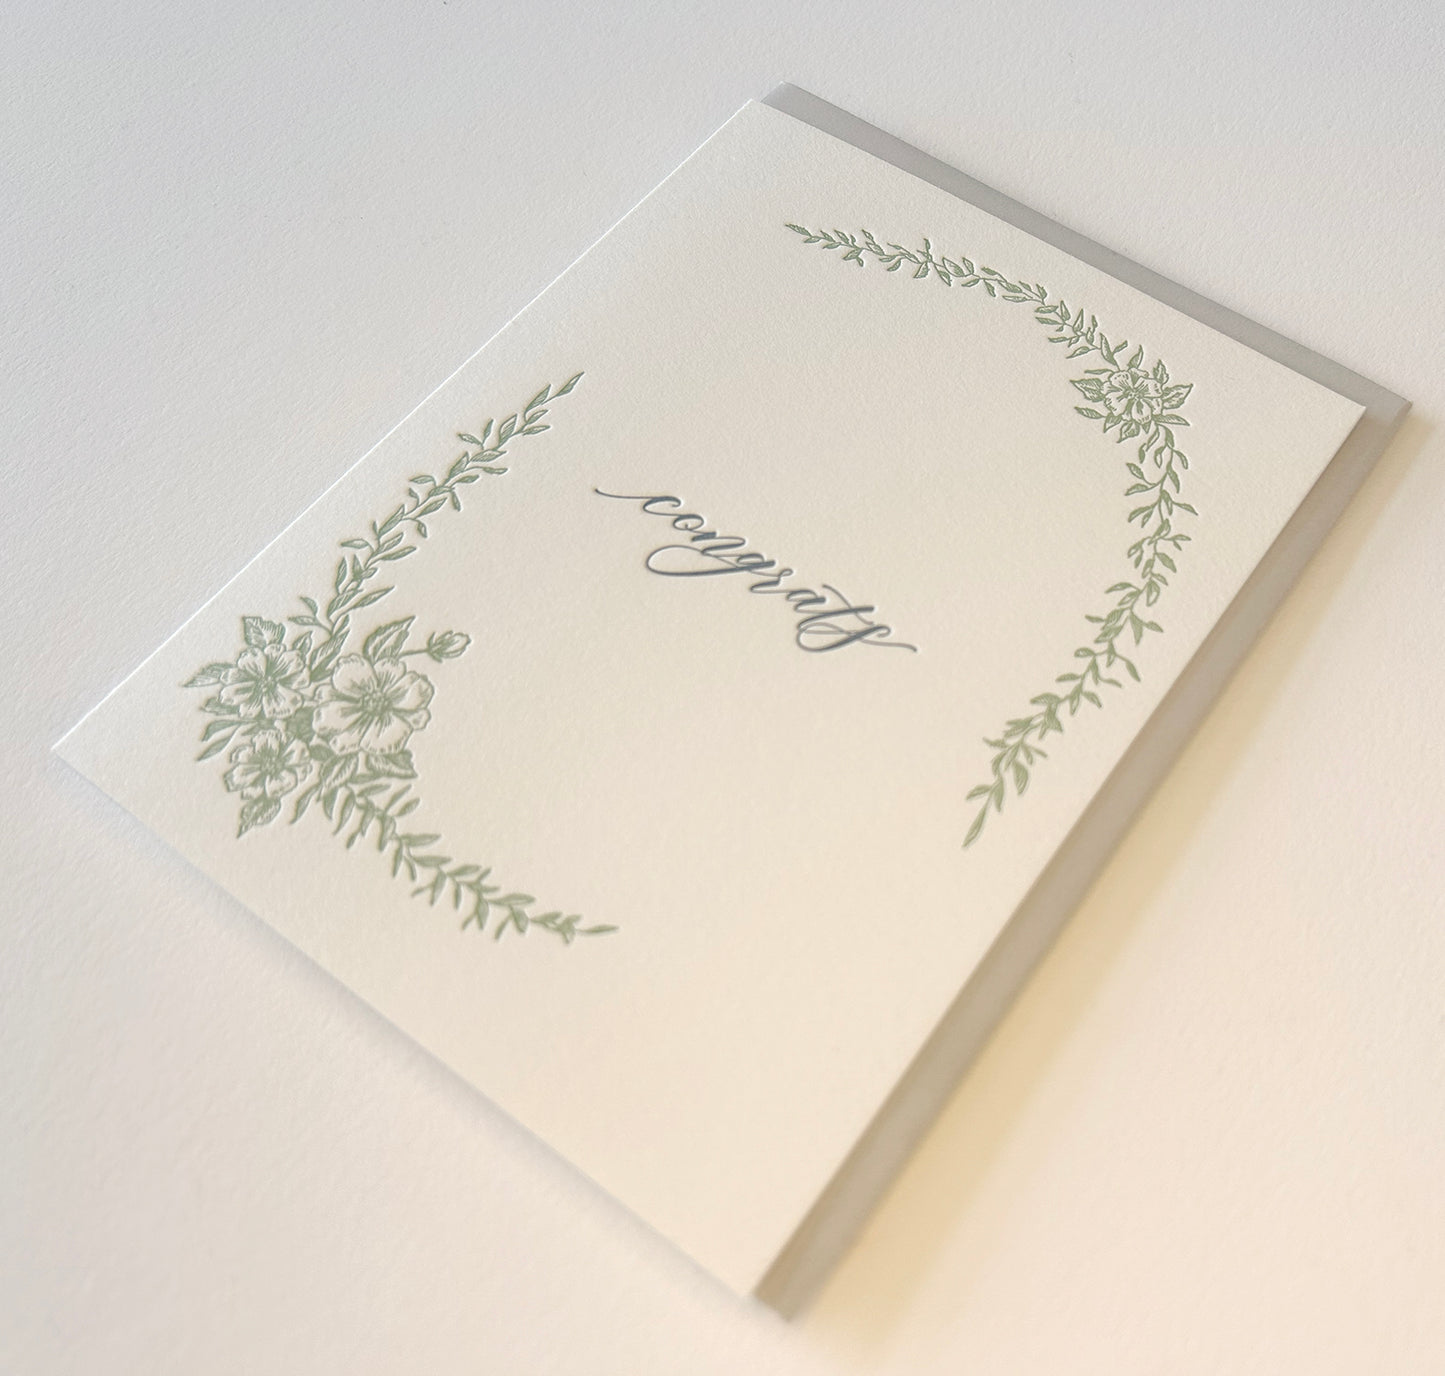 Letterpress congrats card with greenery that says "Congrats" in the middle by Rust Belt Love